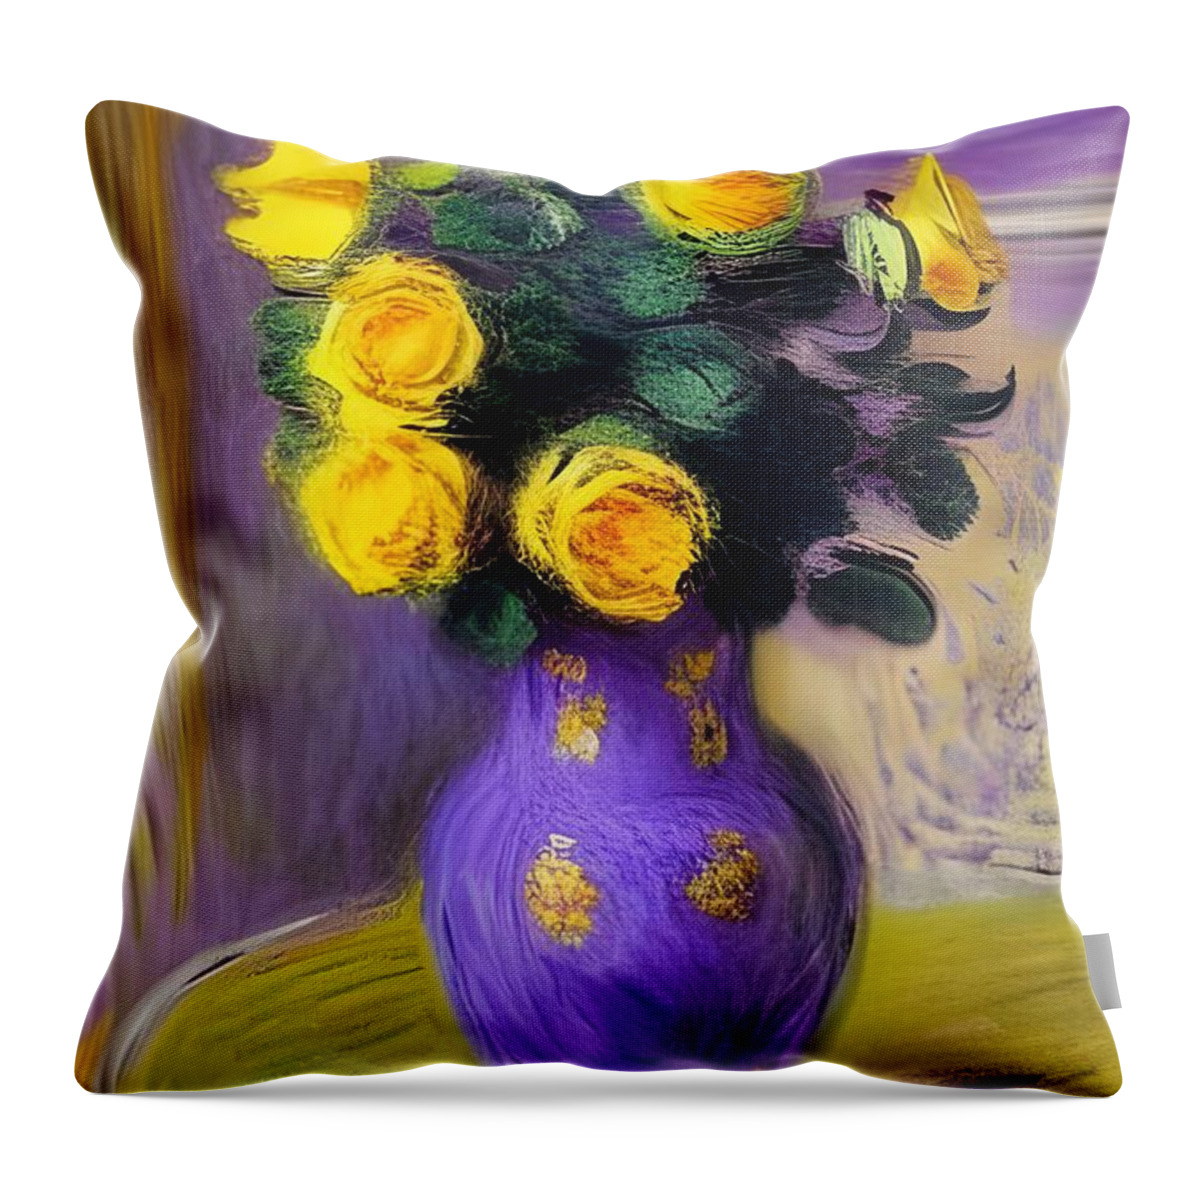 Computer-generated Throw Pillow featuring the digital art Bouquet of Yellow Roses by Katrina Gunn